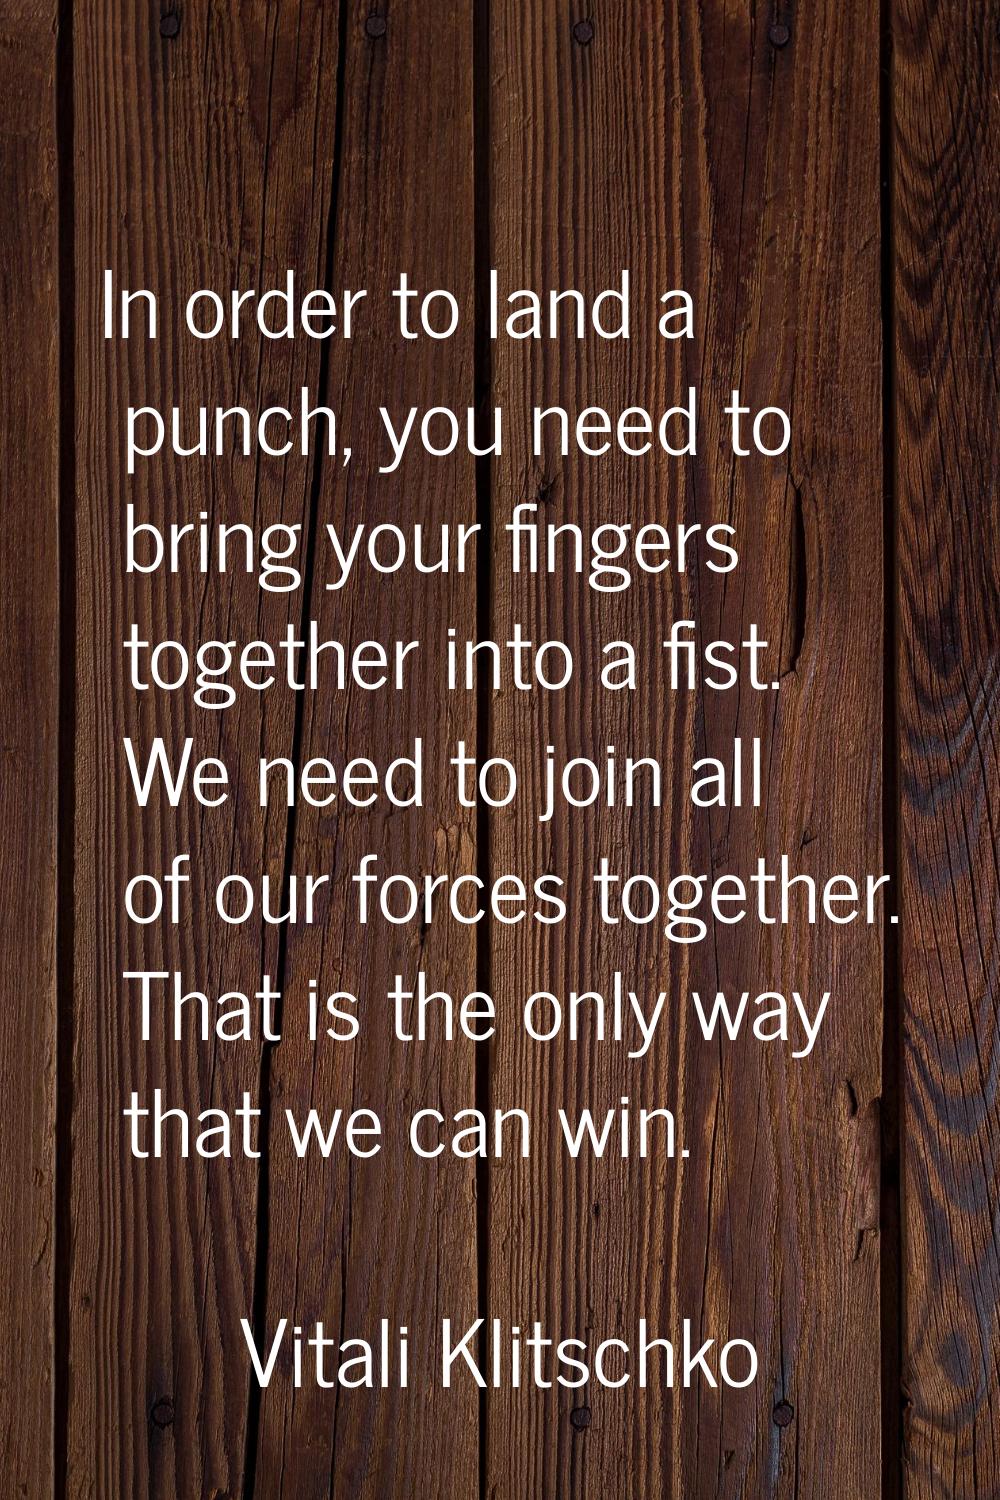 In order to land a punch, you need to bring your fingers together into a fist. We need to join all 